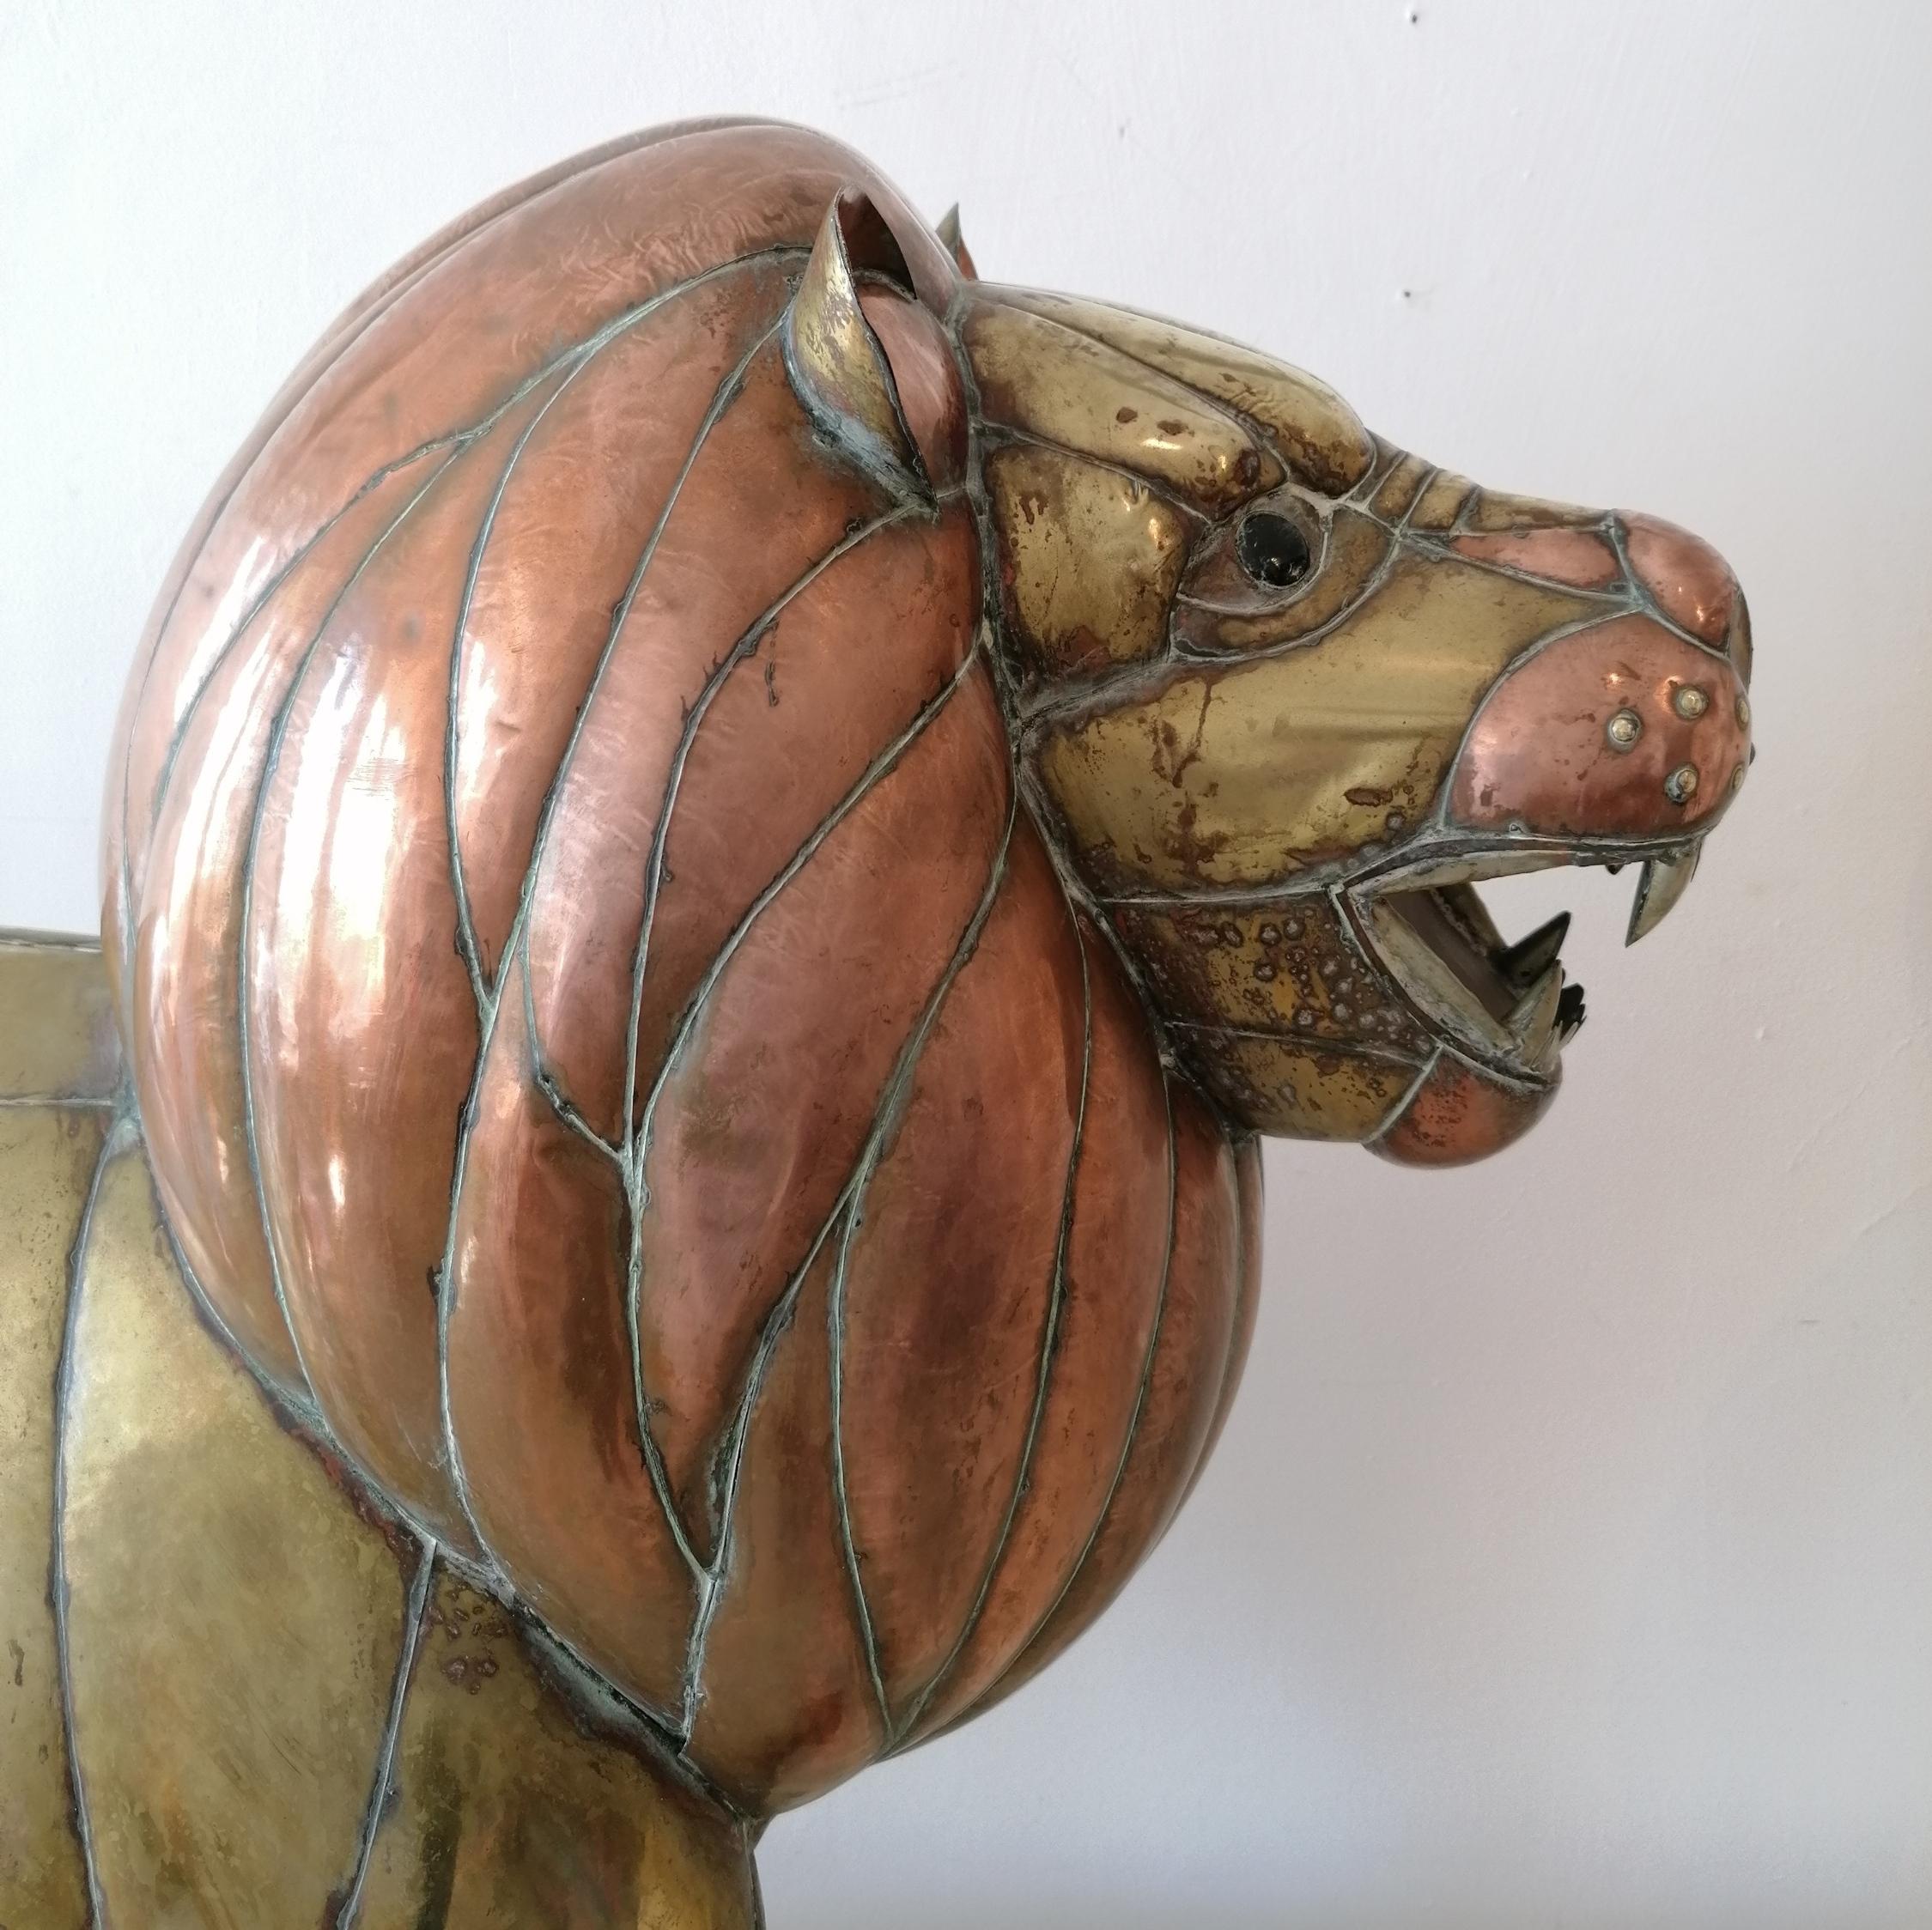 Rare Midcentury Large Brass & Copper Lion Sculpture by Sergio Bustamante, Mexico For Sale 1